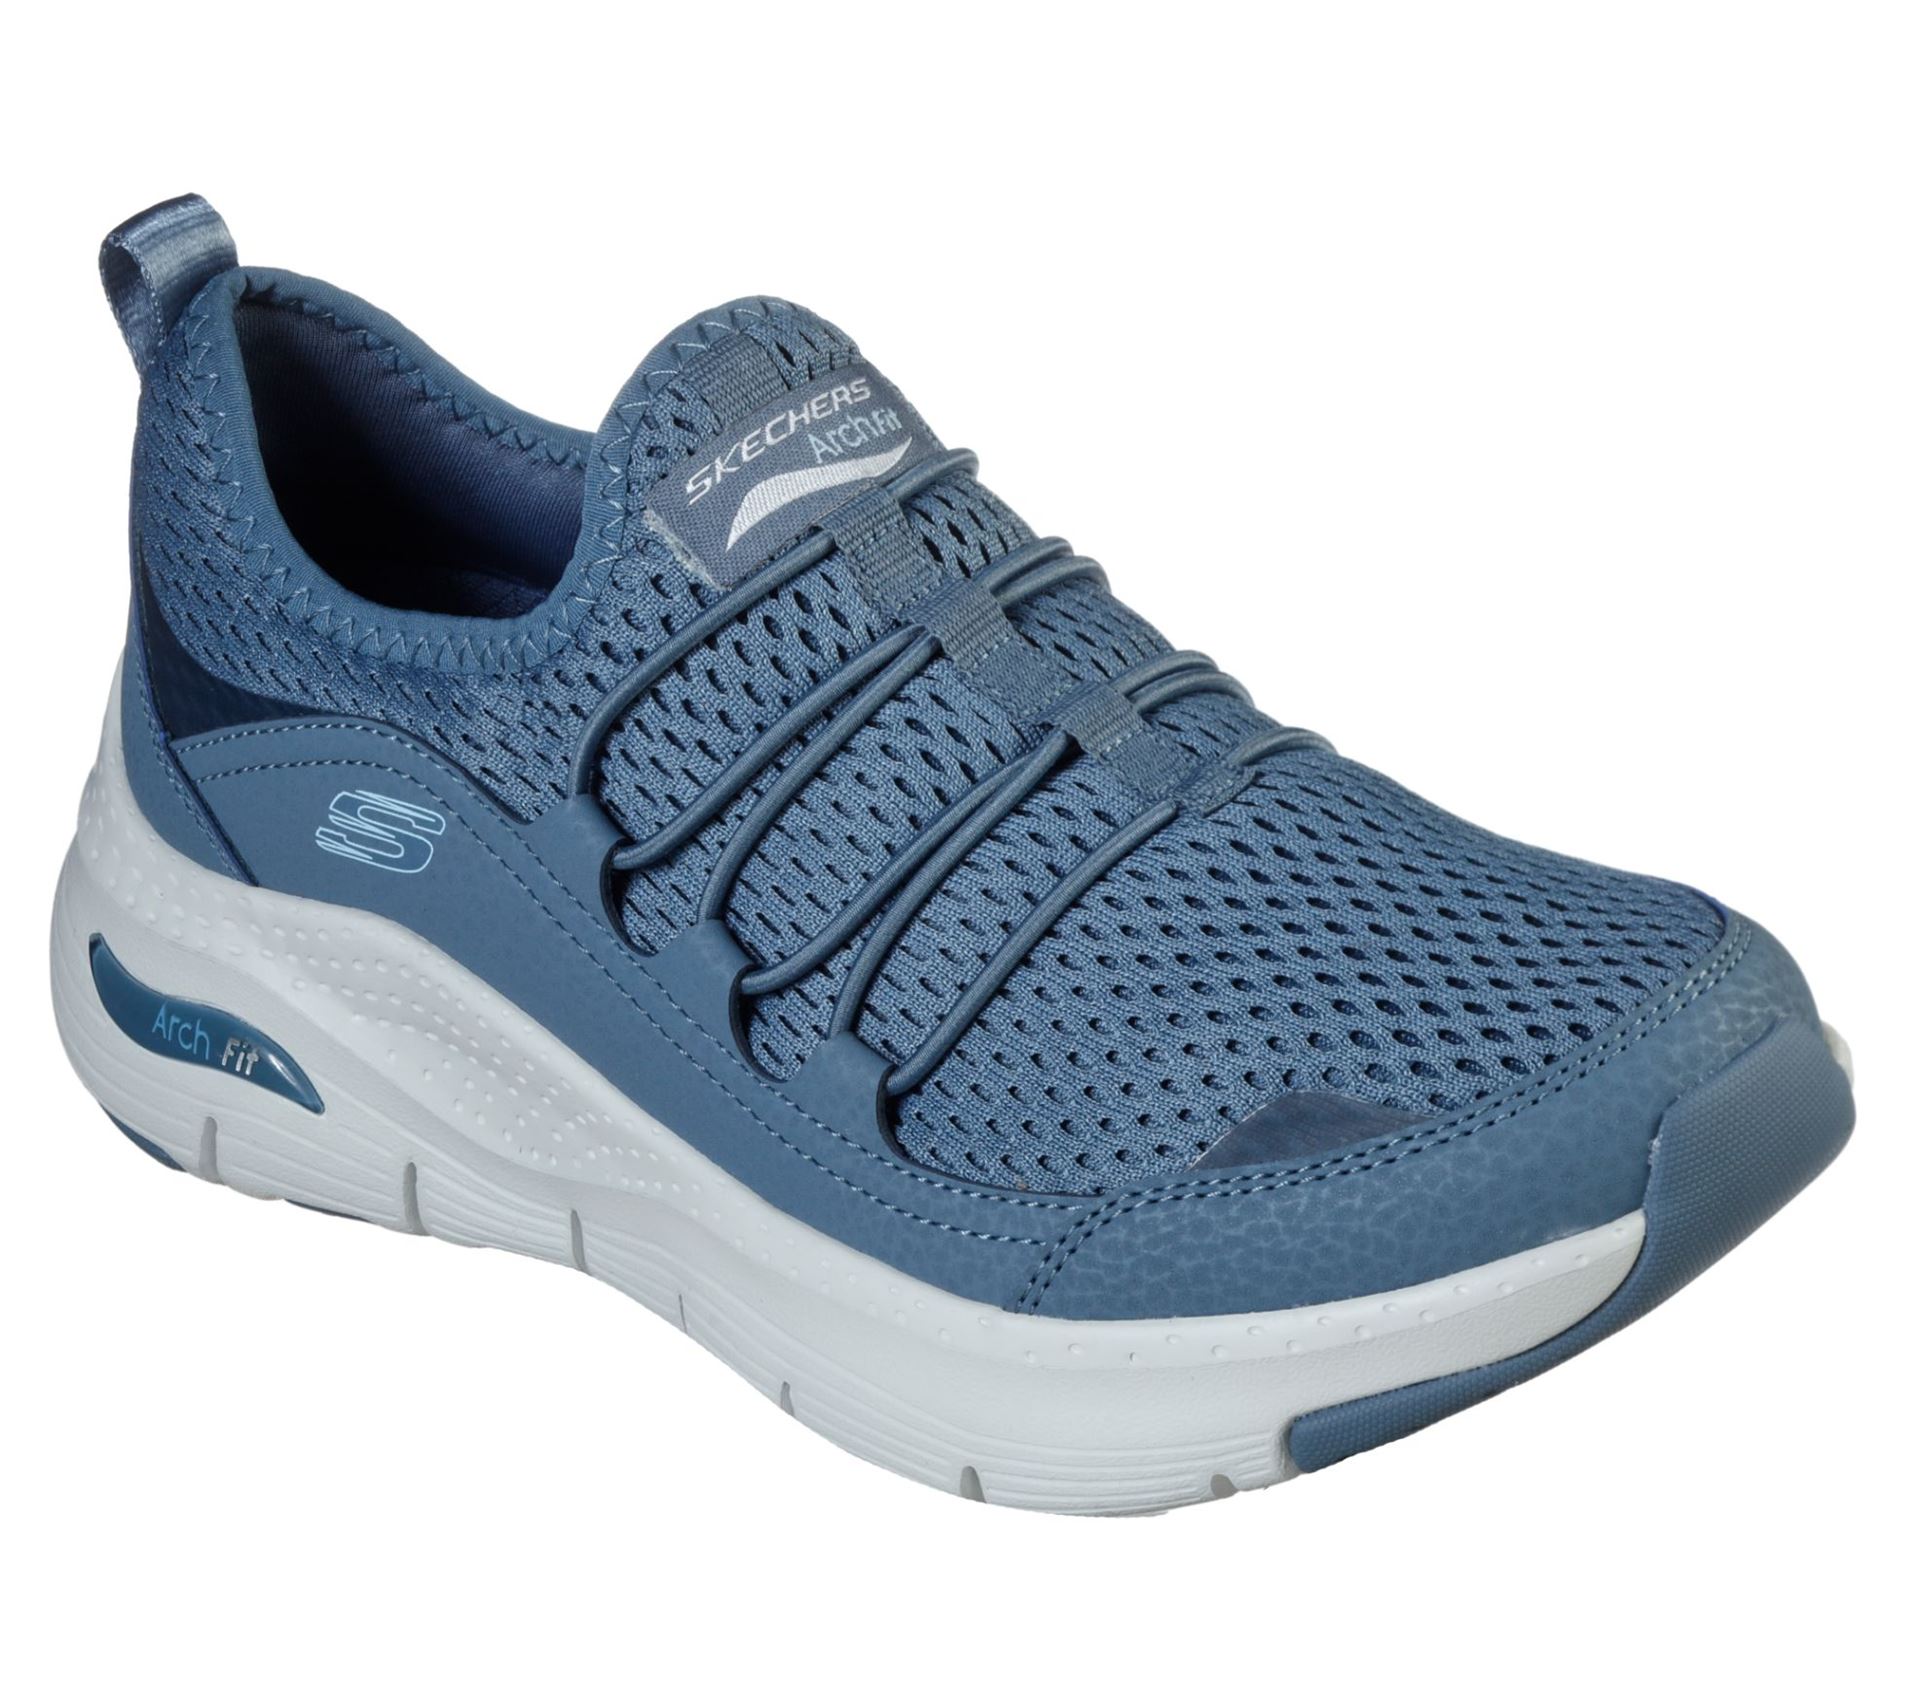 Eurosport | Skechers Arch Fit - Lucky Thoughts Women